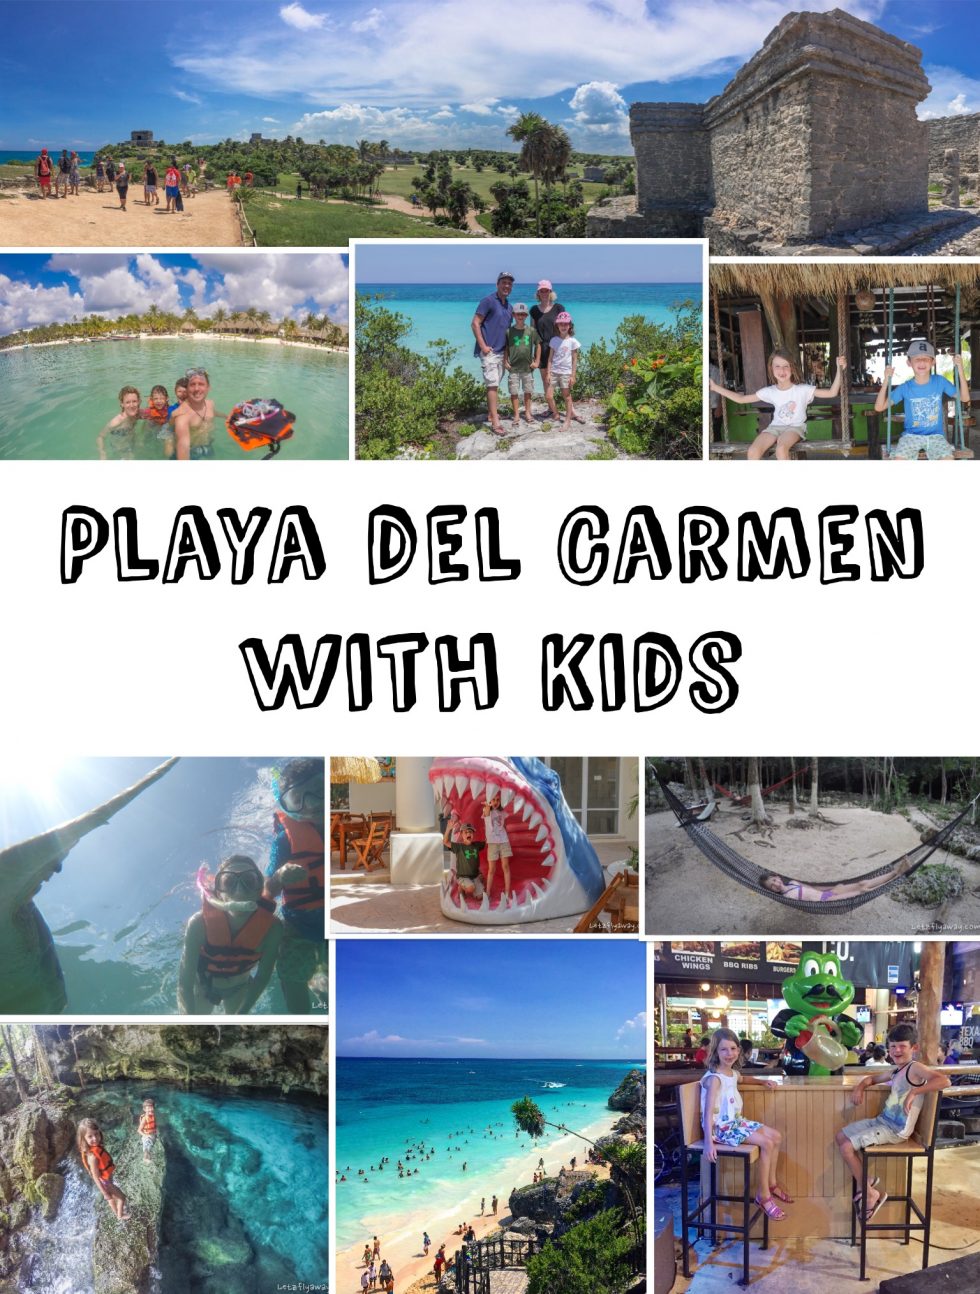 Things to do in playa del carmen with kids